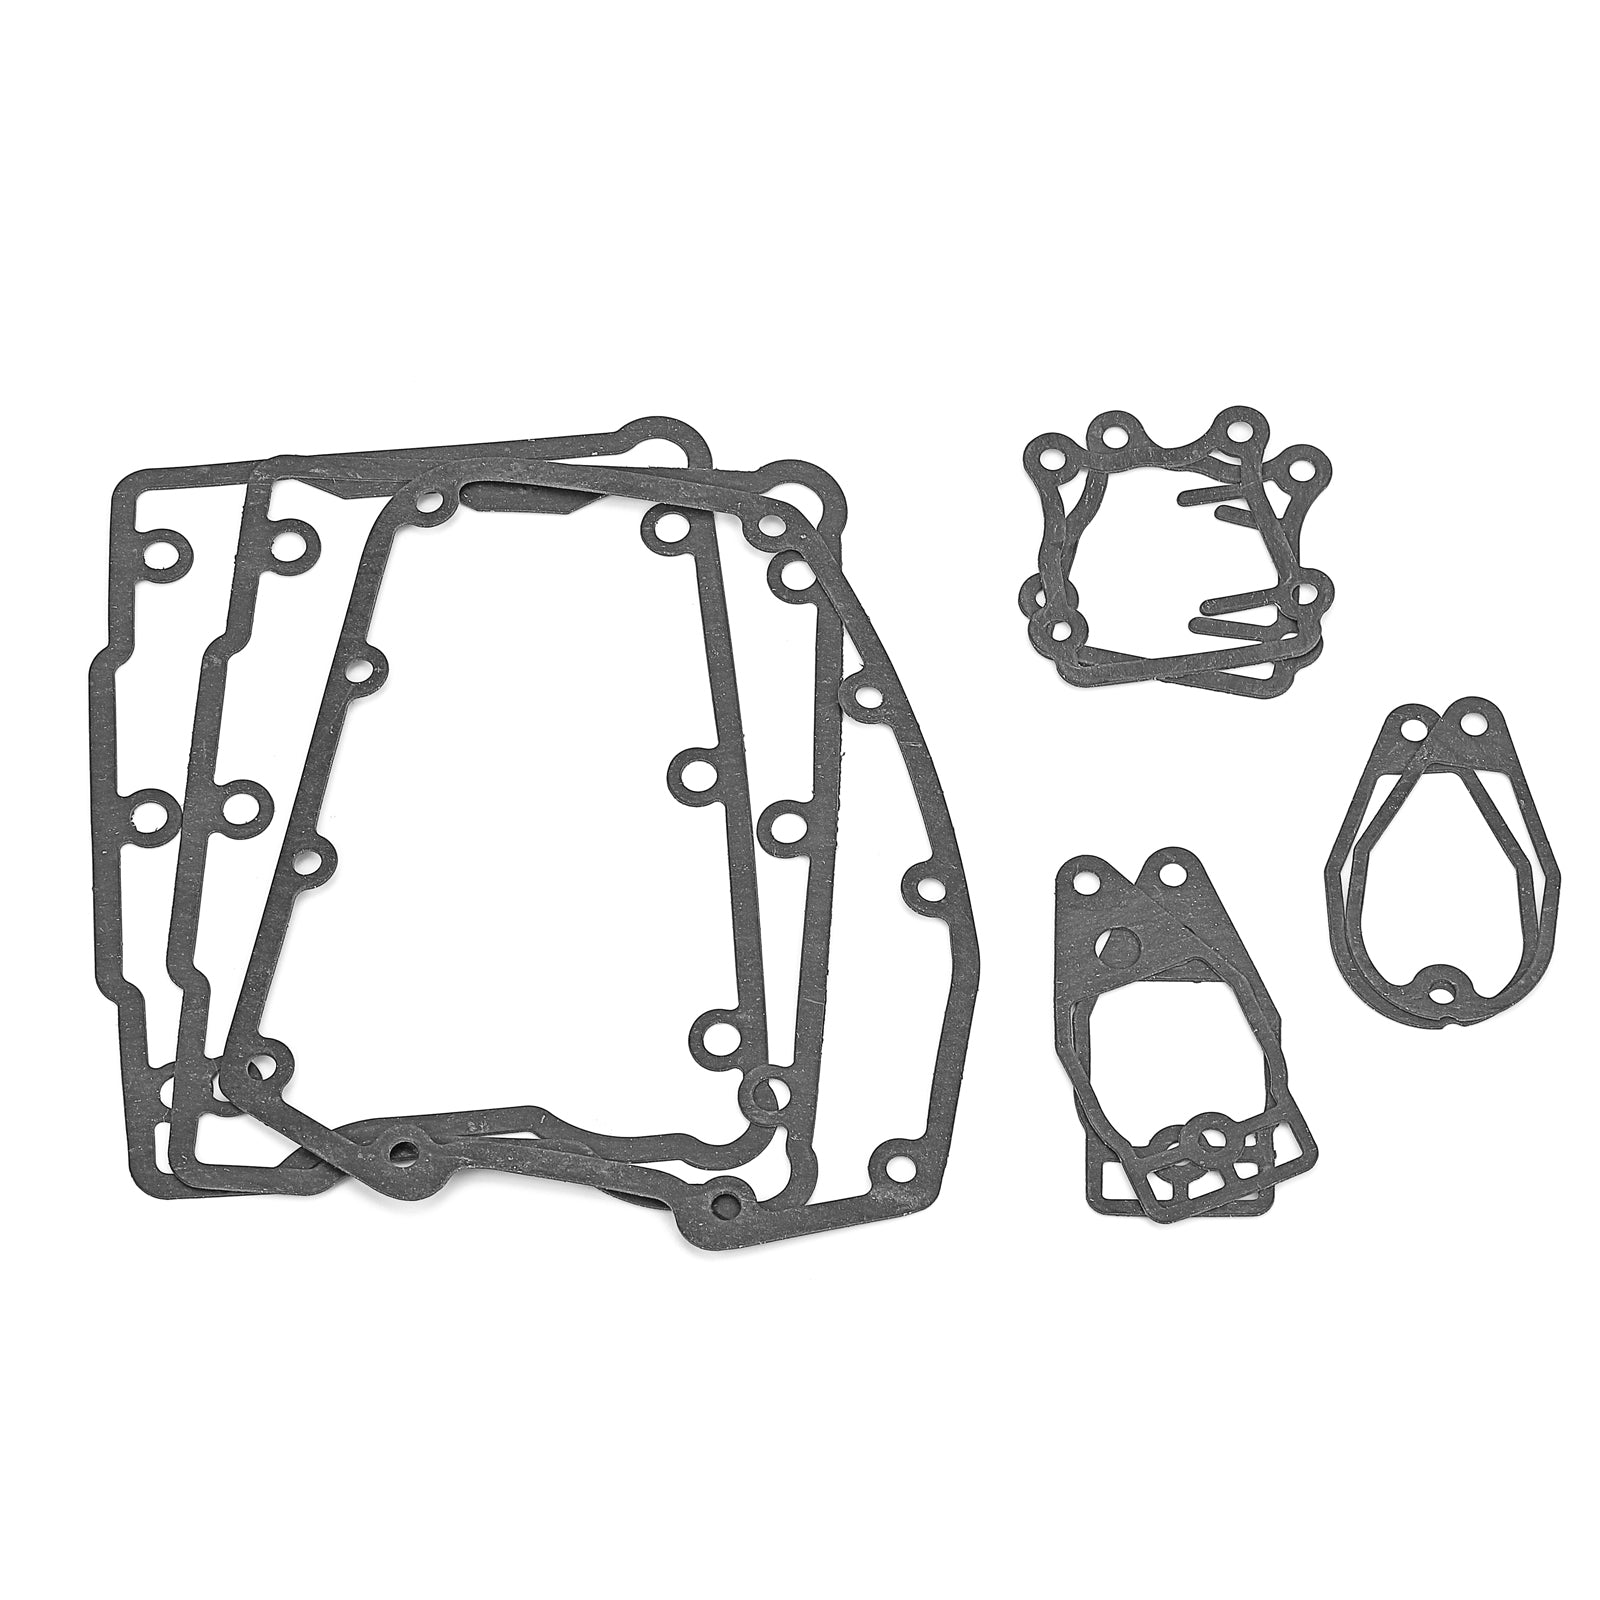 1999-2013 Harley Twin Cam Full Gasket Seal O-ring replace k-3